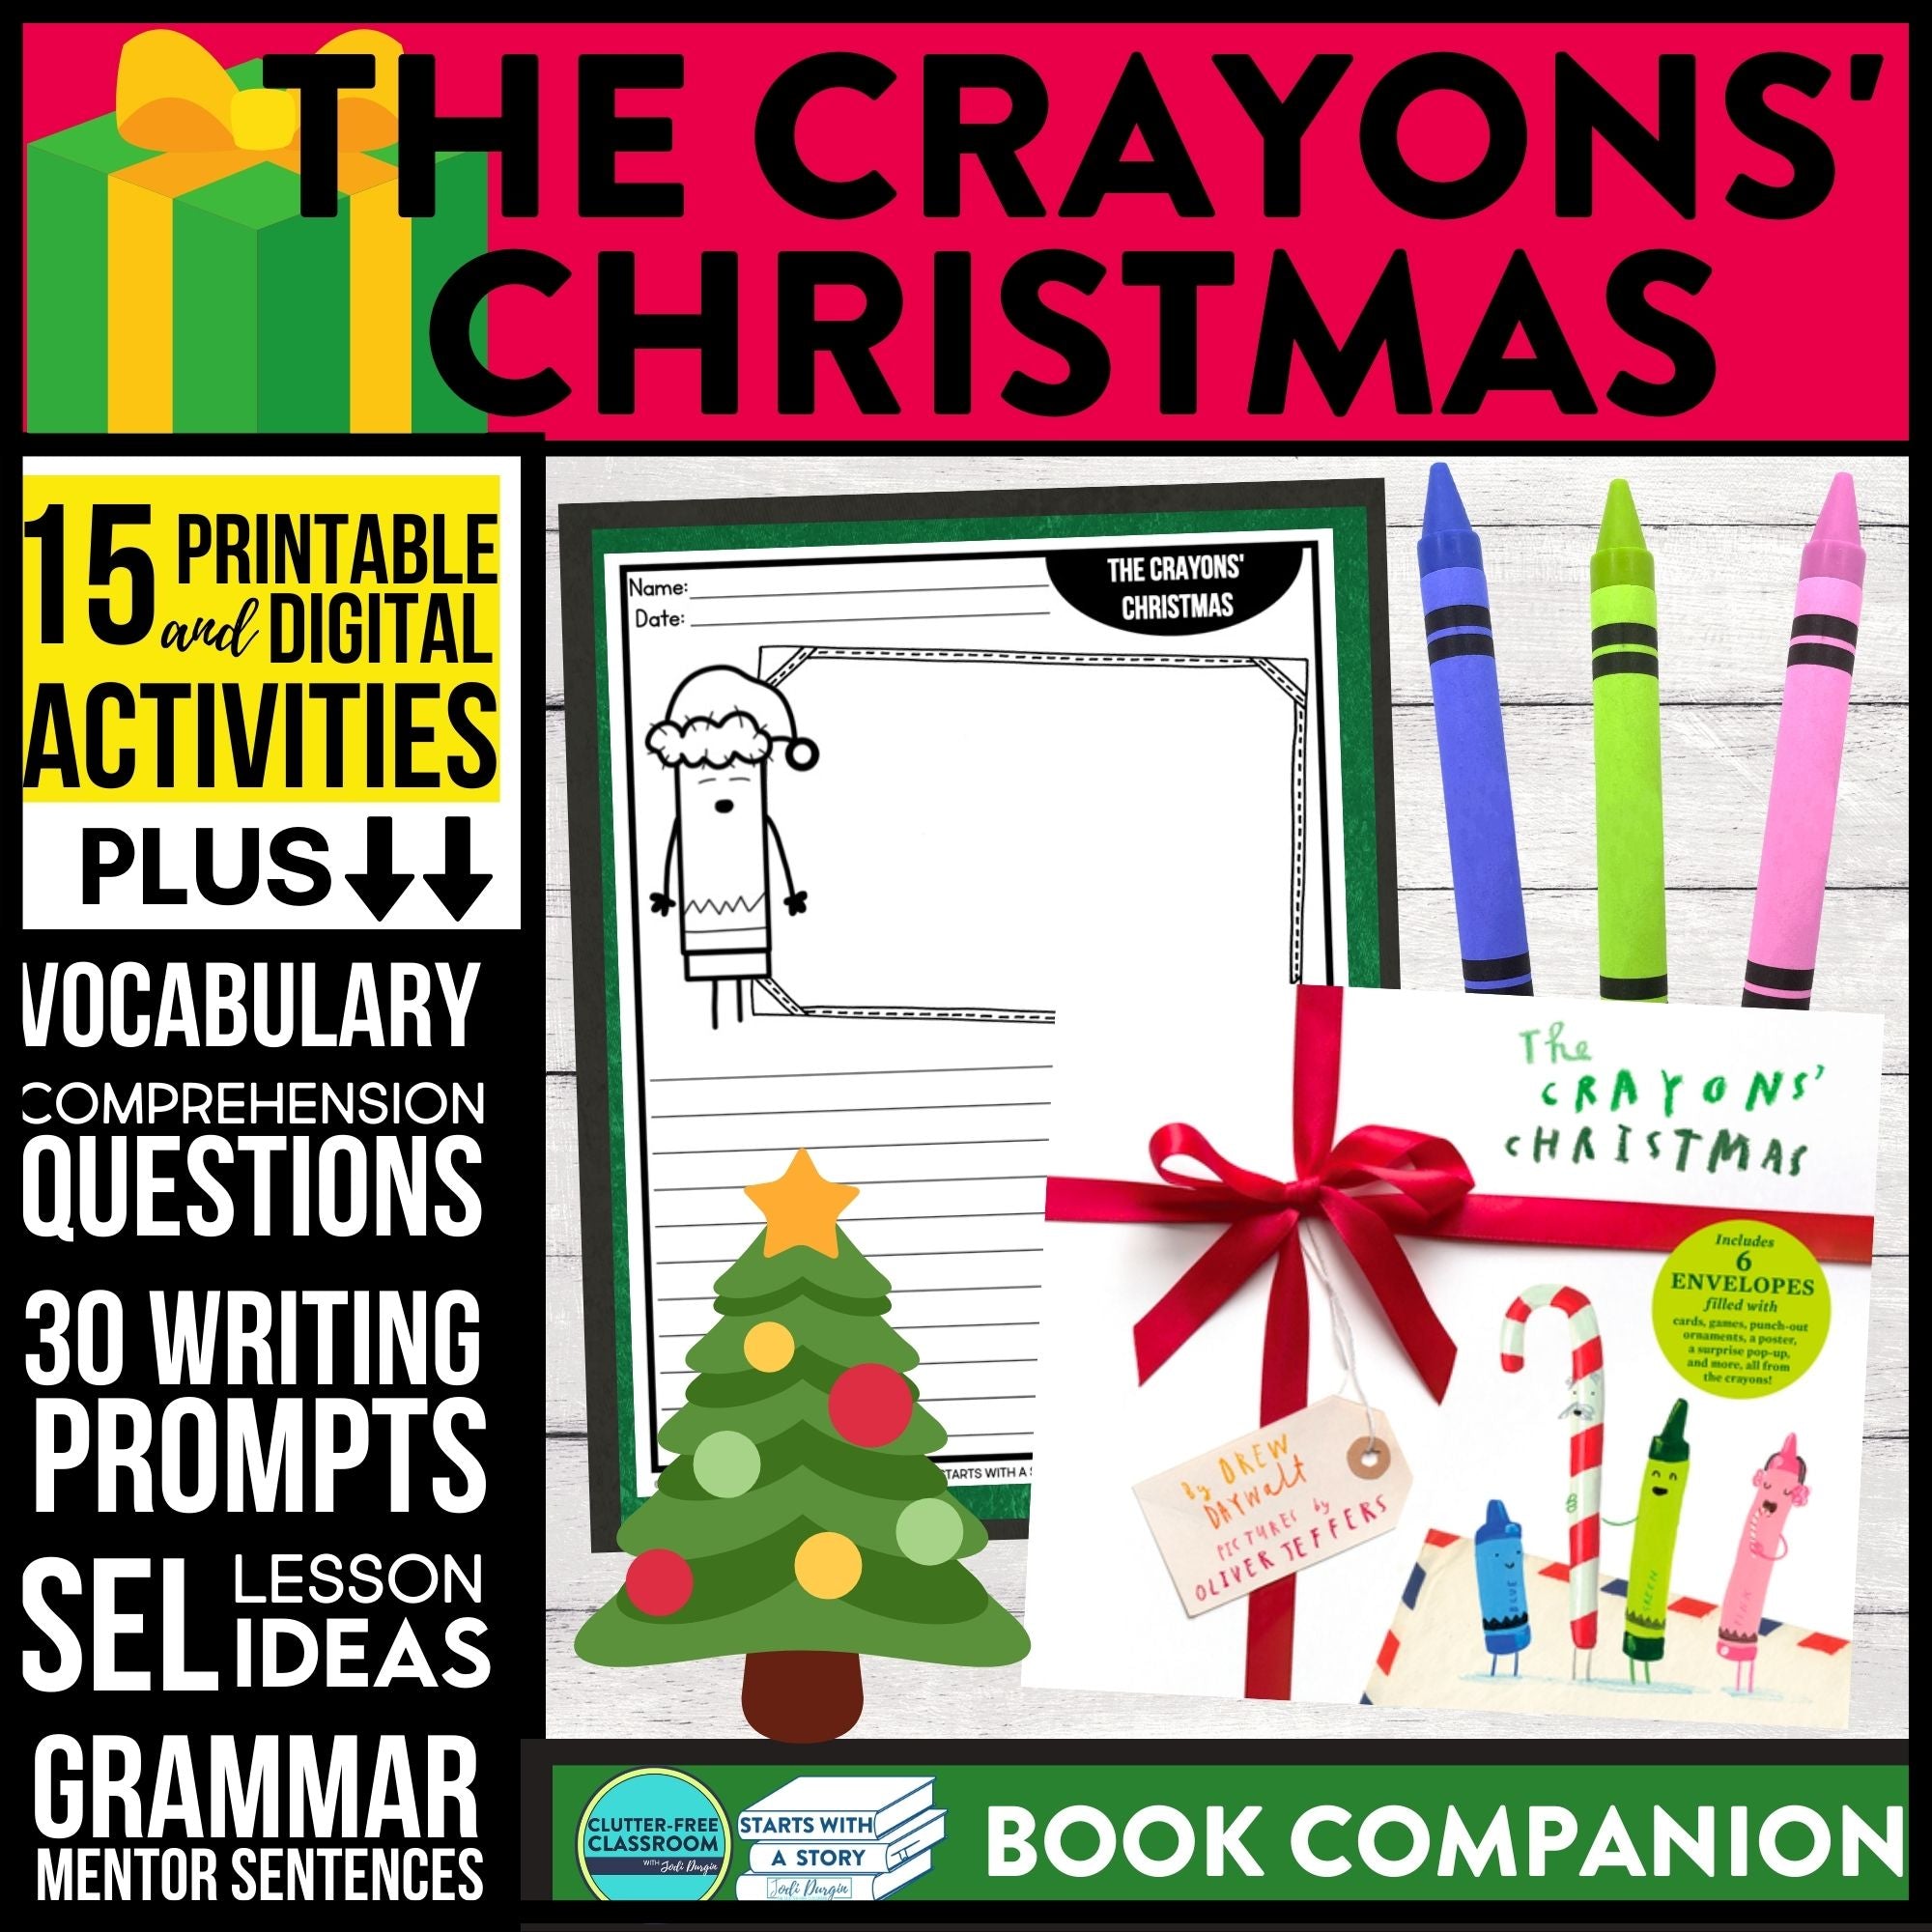 THE CRAYONS' CHRISTMAS activities and lesson plan ideas